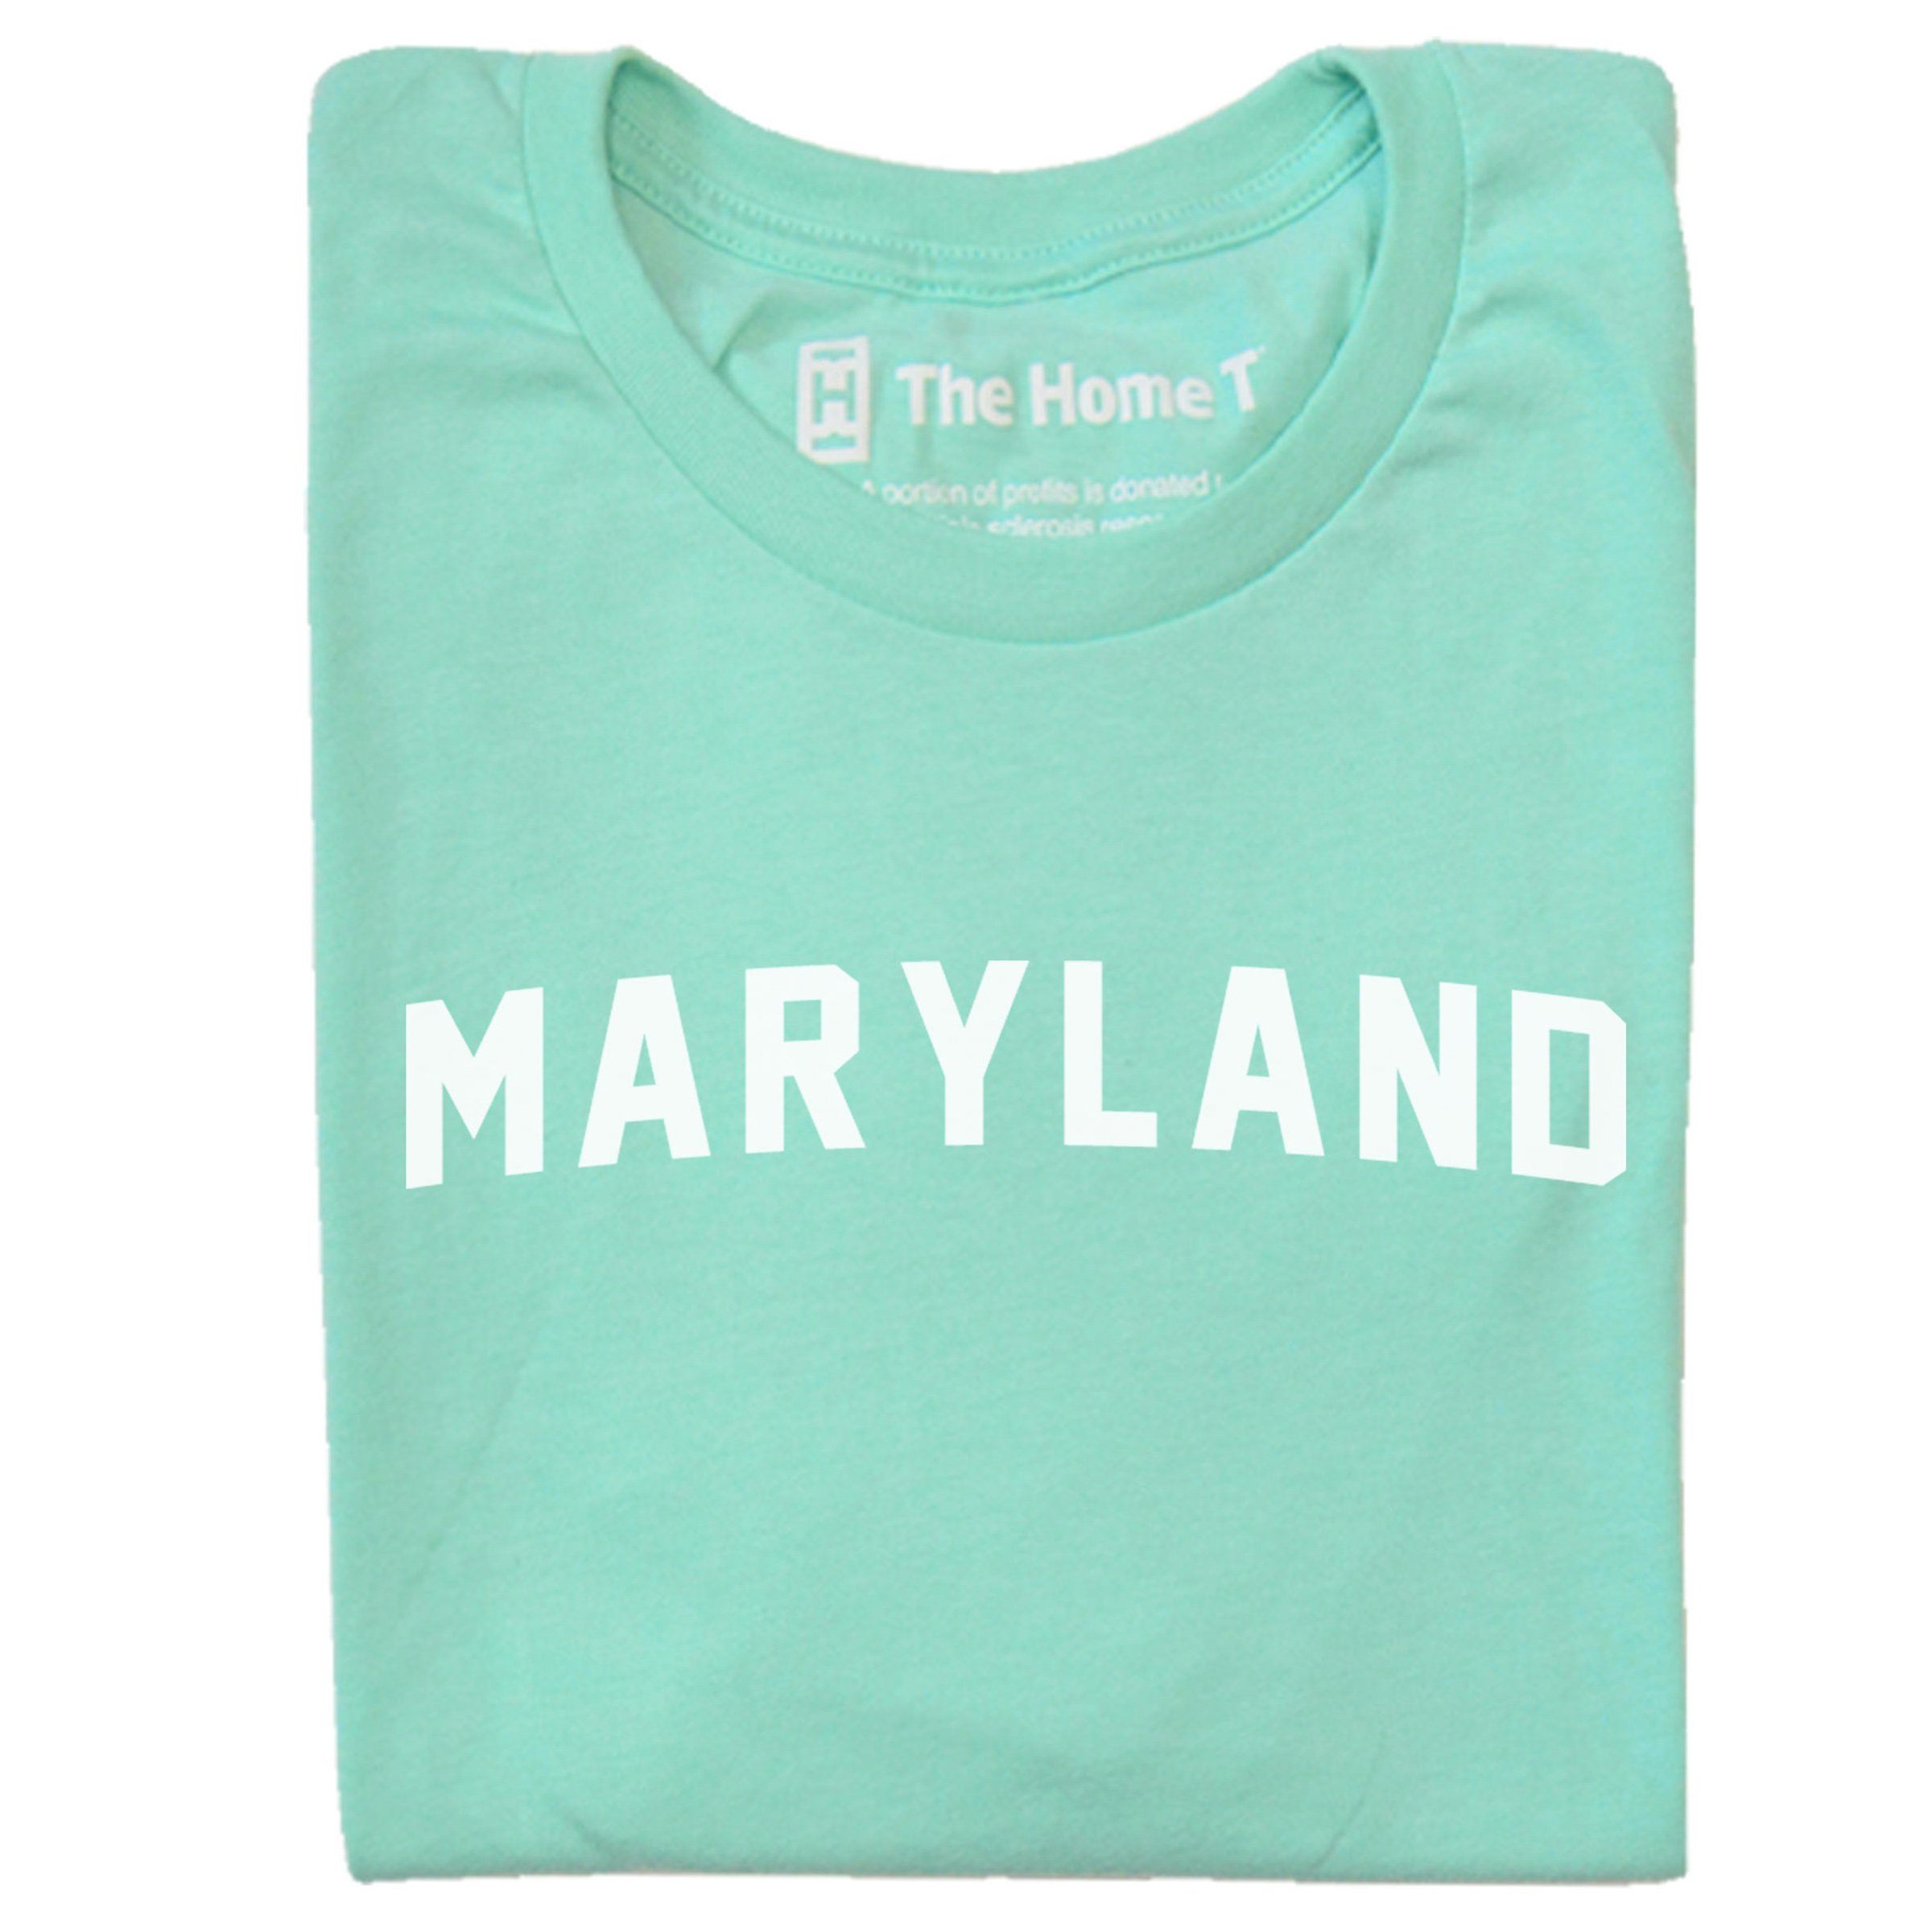 Maryland Arched The Home T XS Mint